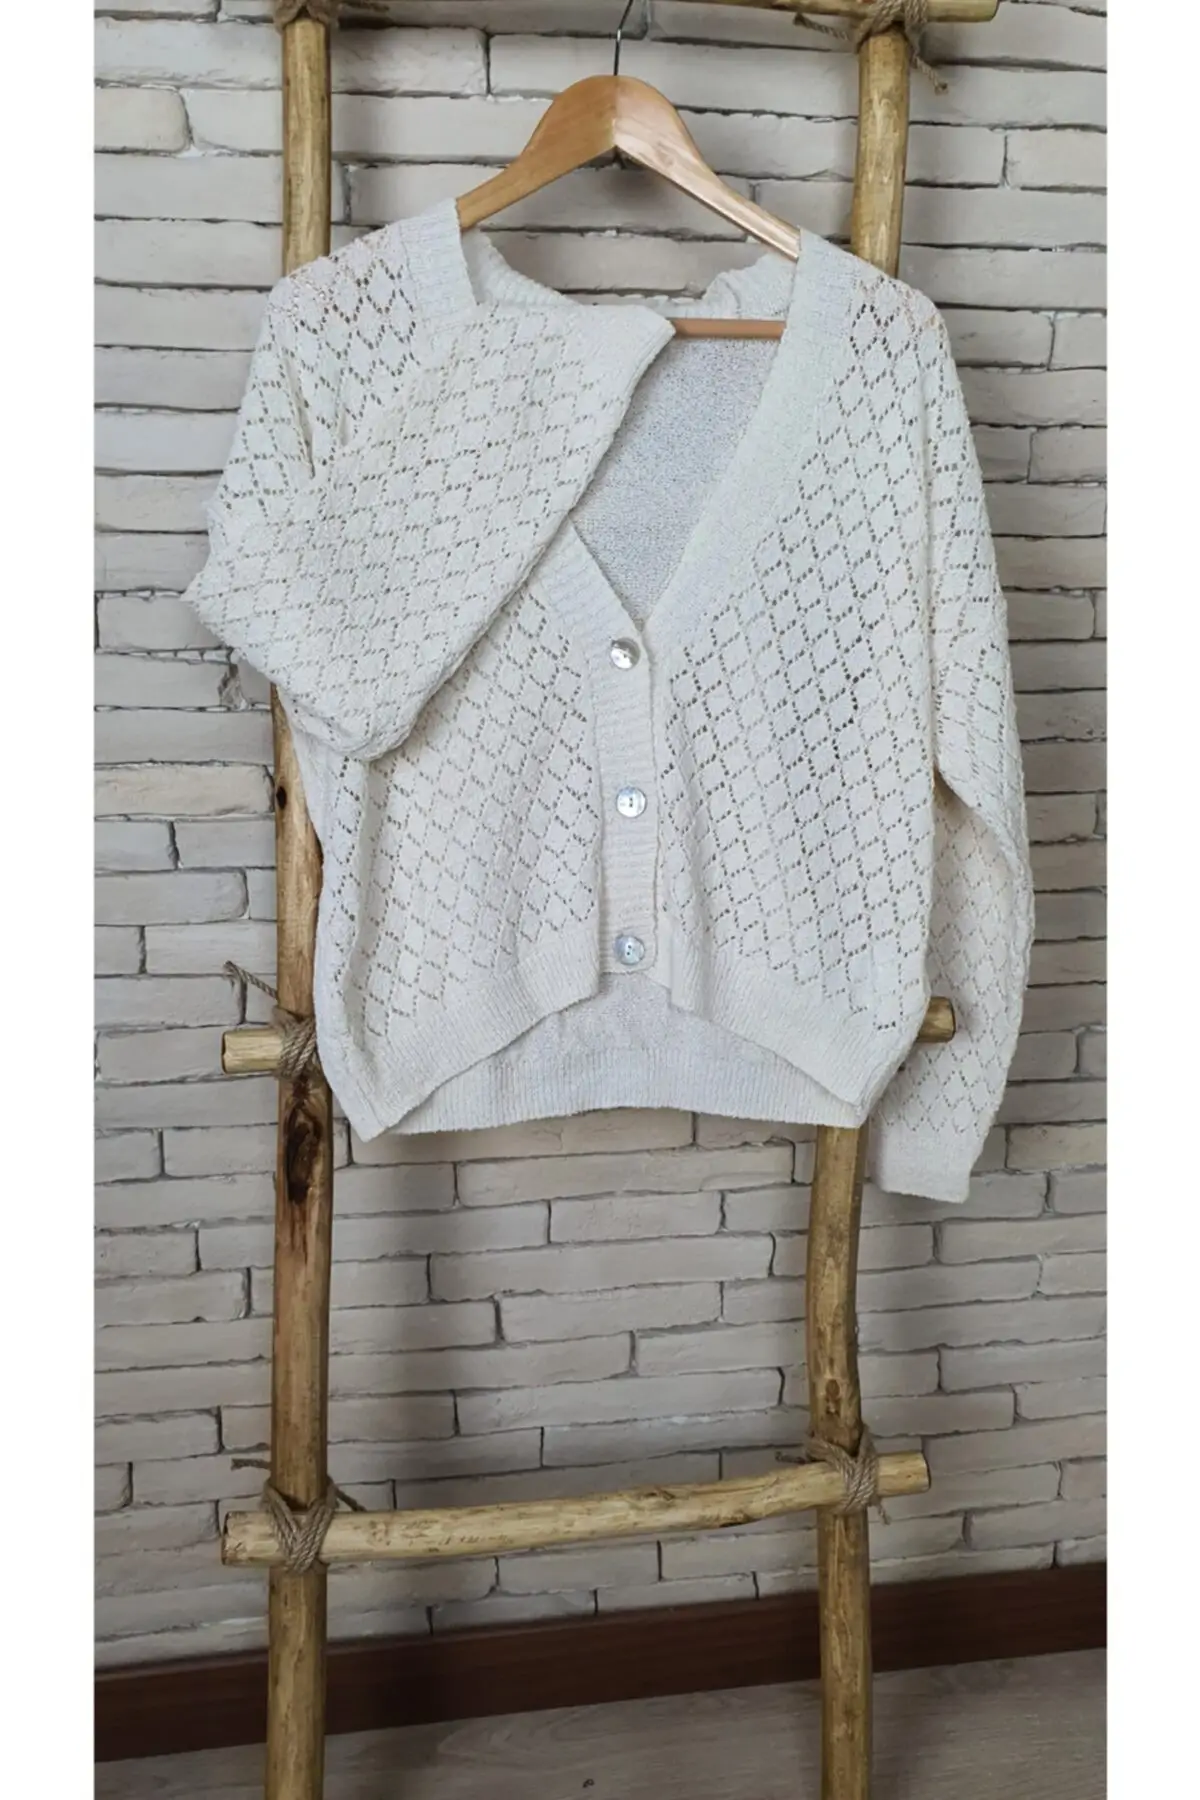 

Women's Cardigan Ecru Perforated Knitted Knitted Quality Fashion Cardigan Sweaters Loose Sweater Sweater Sweater Jumper